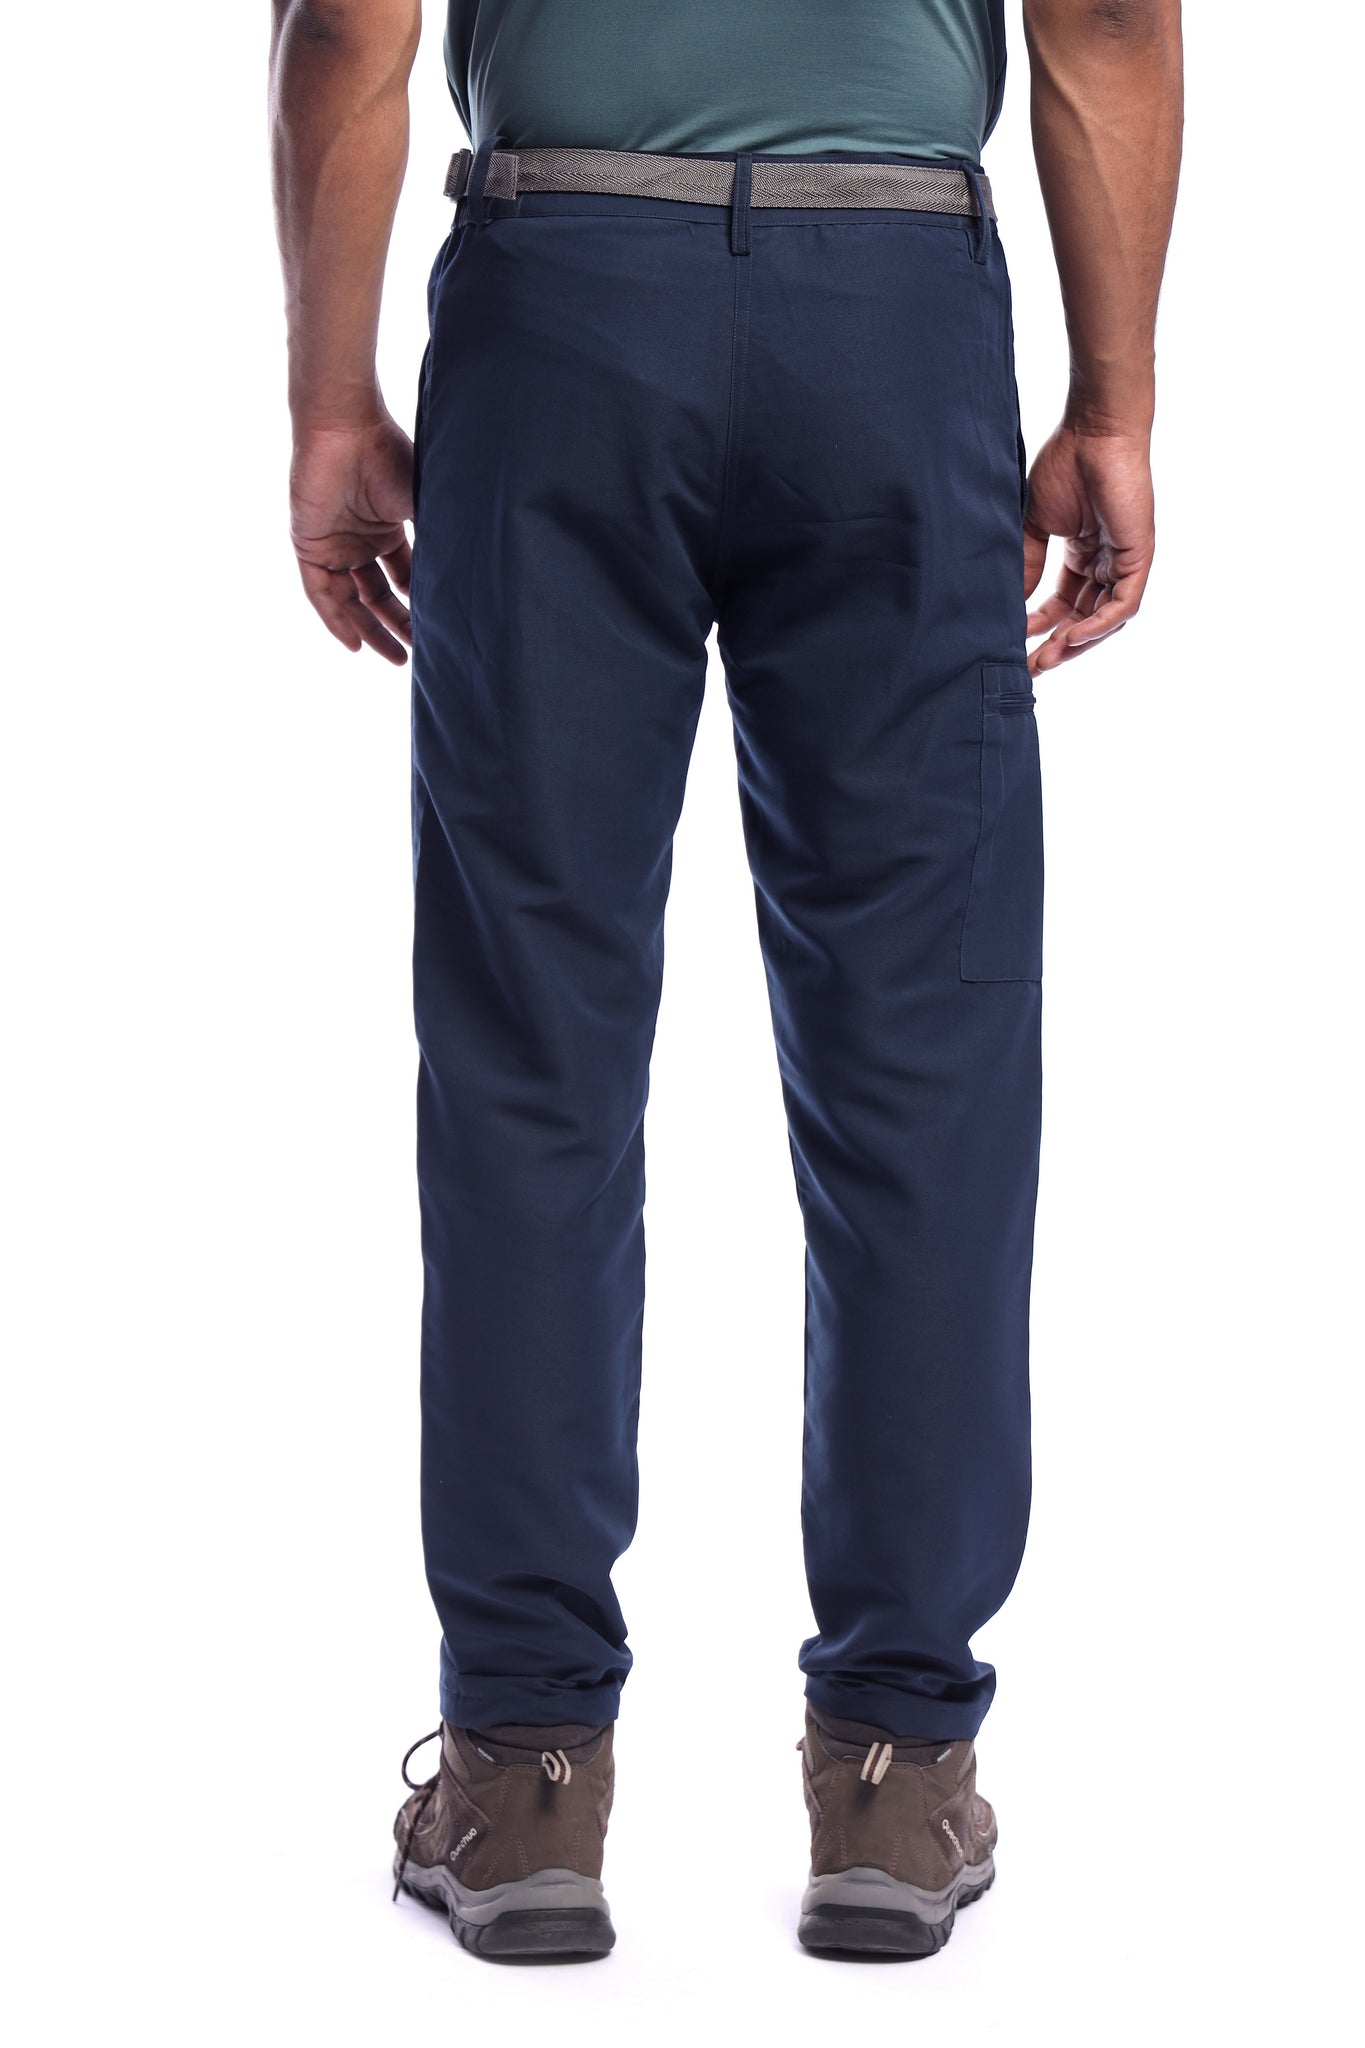 Decathlon Hiking Trousers, Women's Fashion, Activewear on Carousell